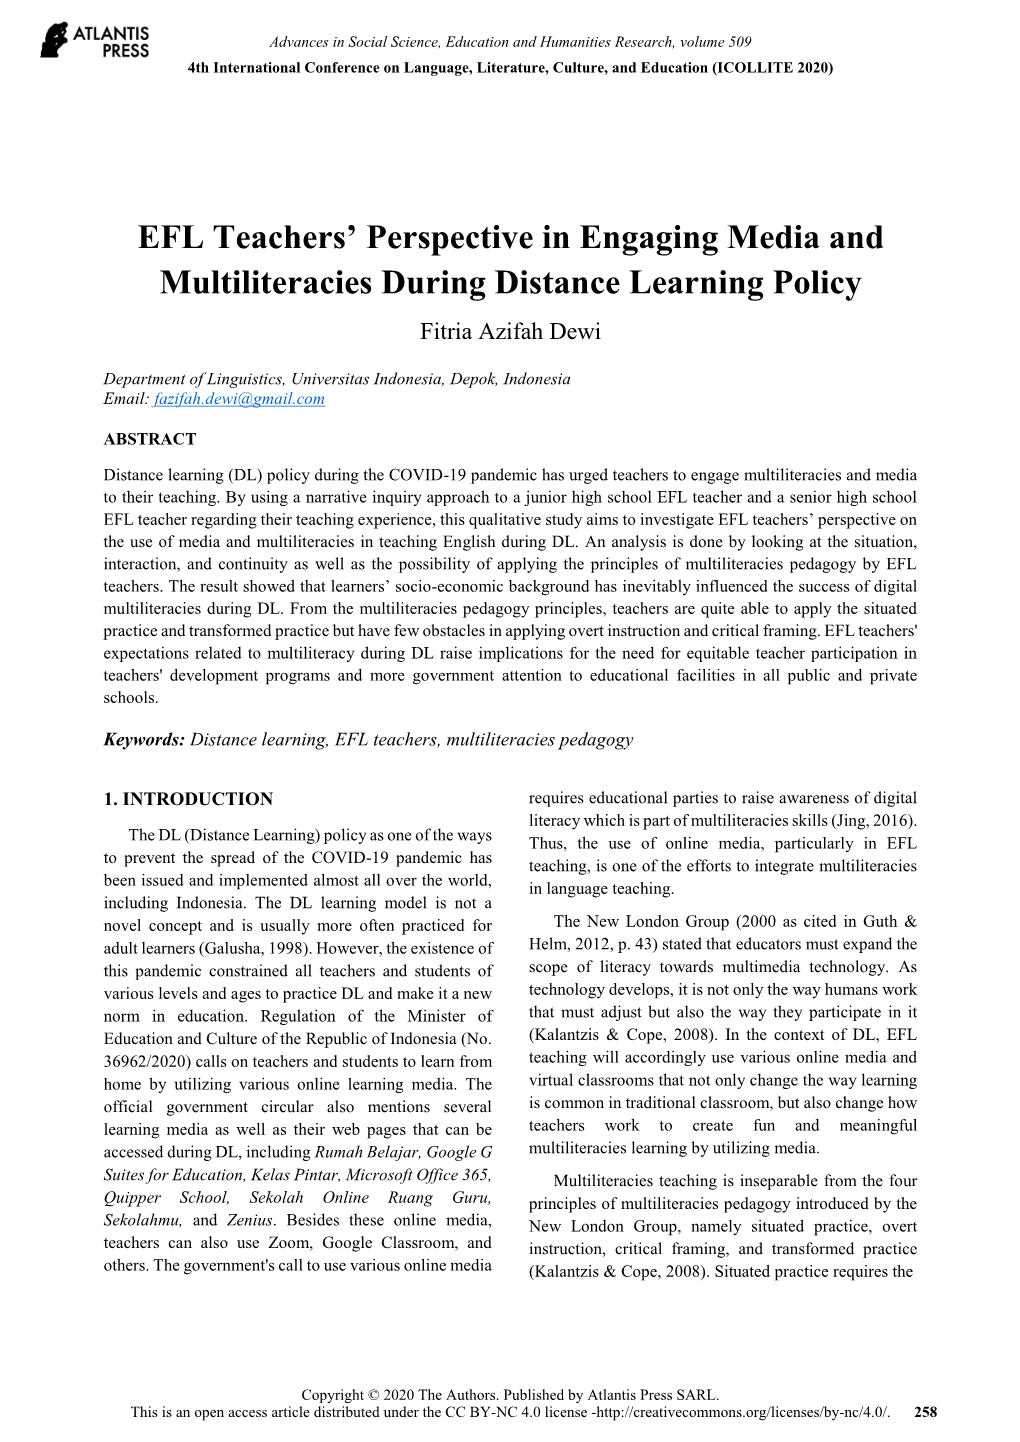 EFL Teachers' Perspective in Engaging Media and Multiliteracies